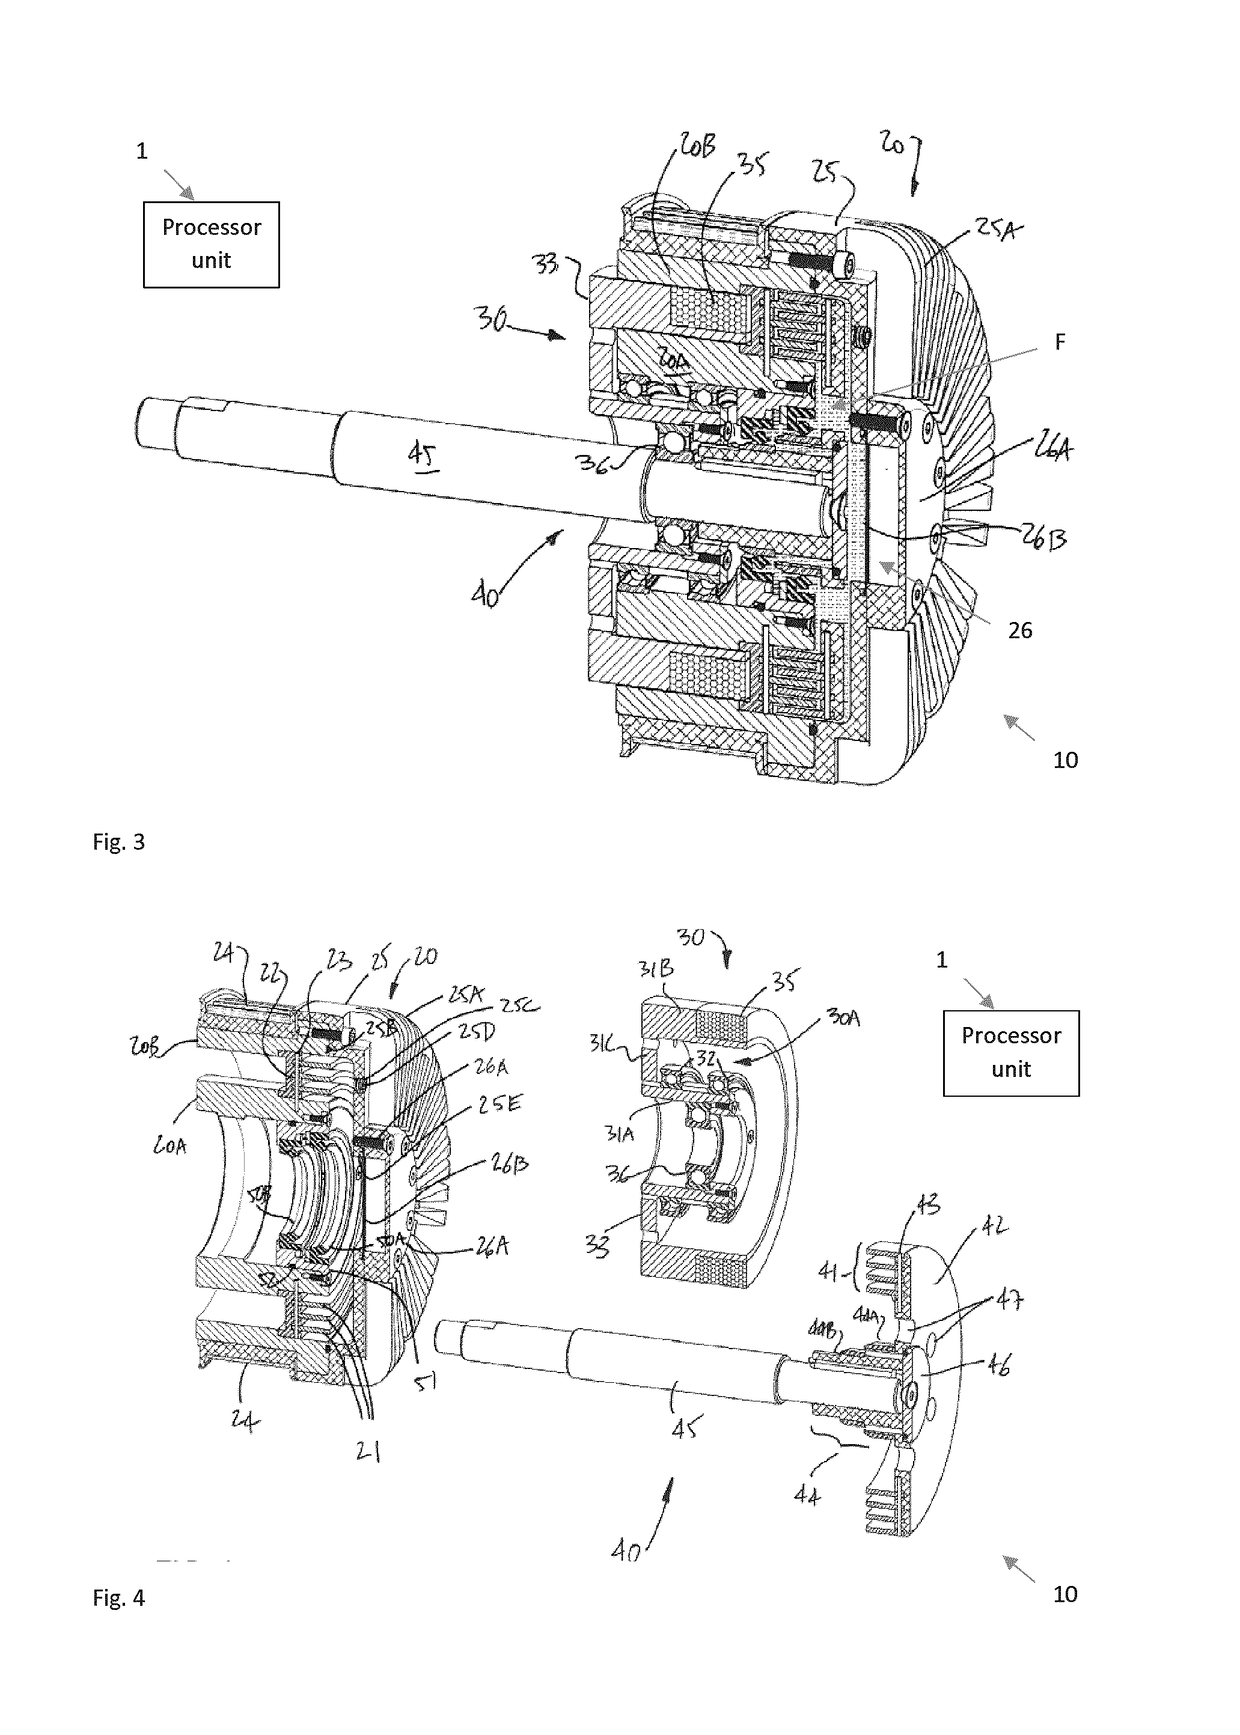 Human-hybrid powertrain for a vehicle or moving equipment using magnetorheological fluid clutch apparatus